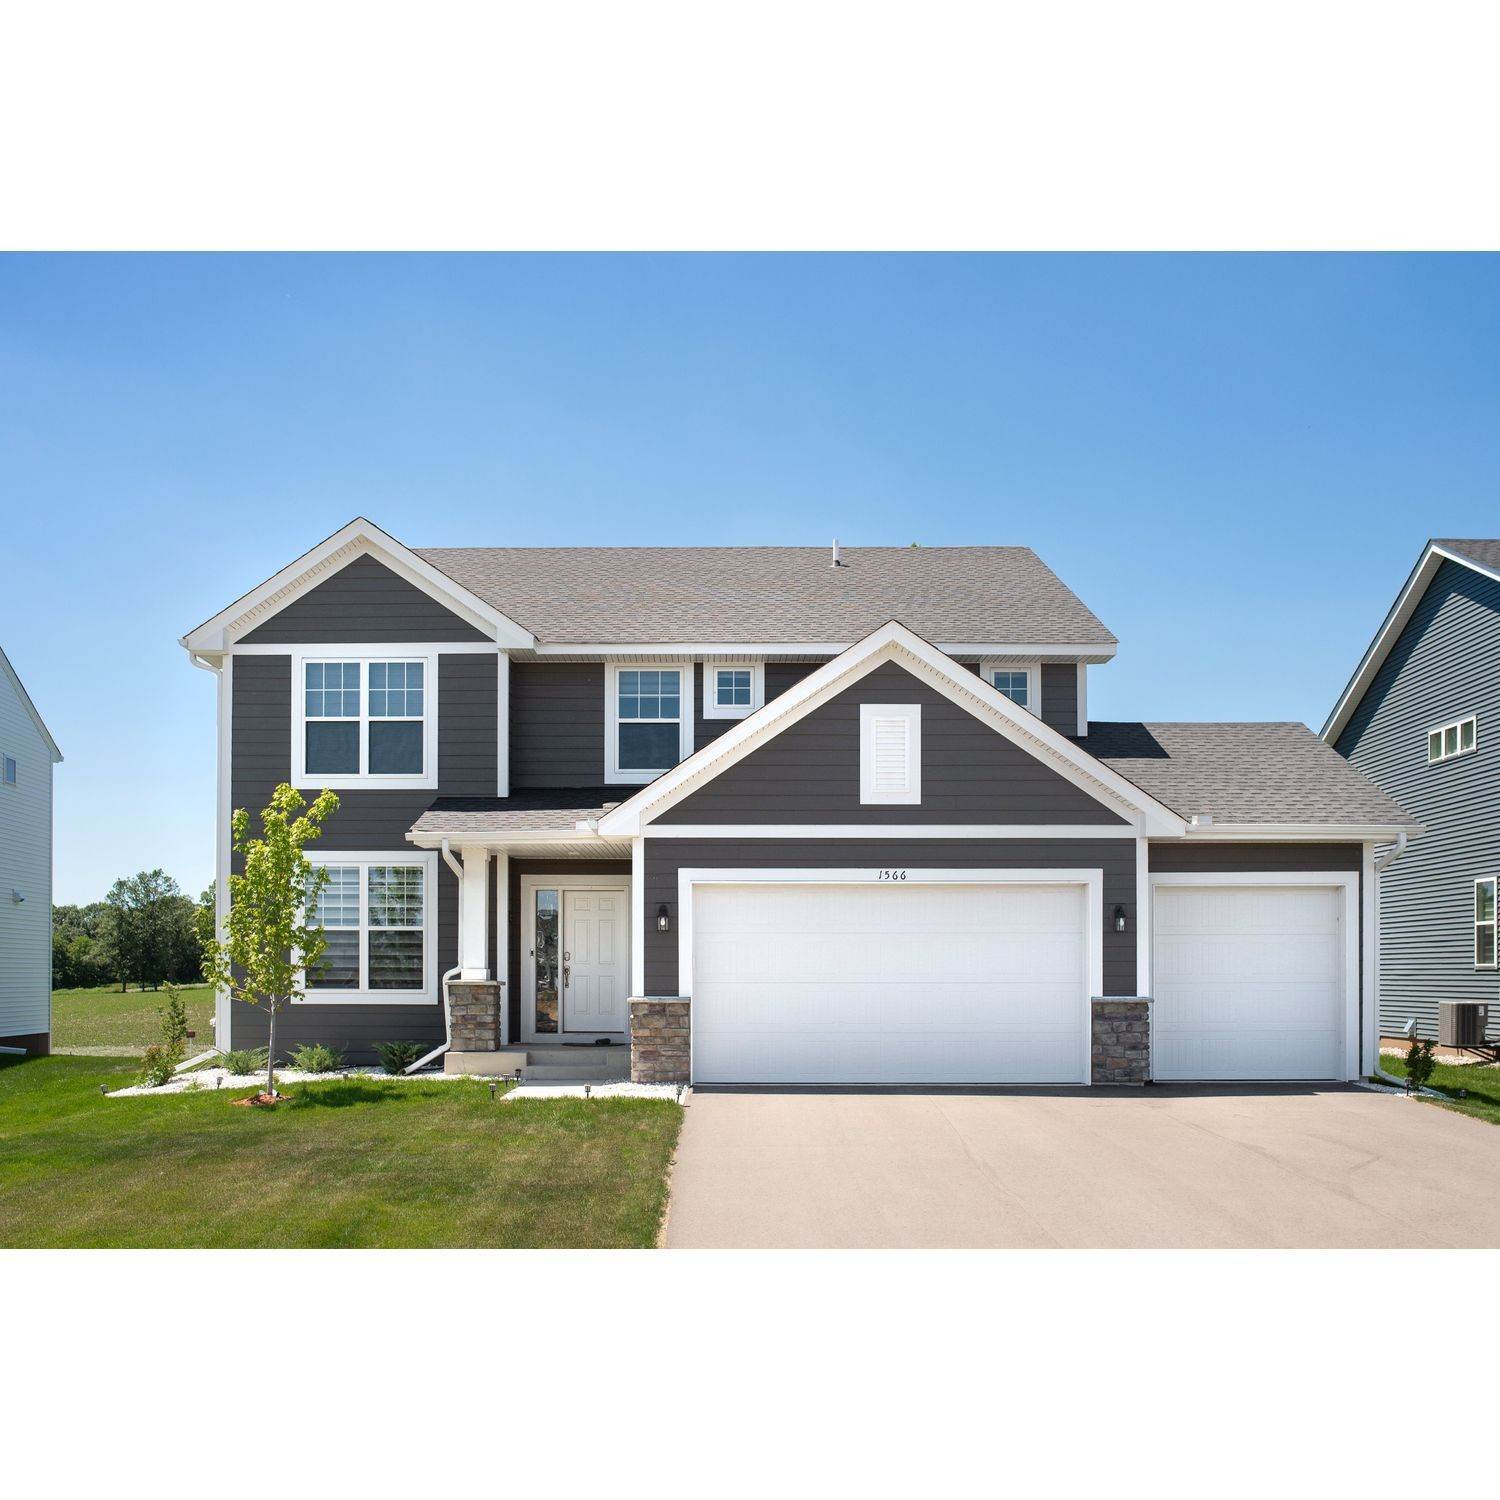 7. Hunter Hills - Discovery Collection xây dựng tại 8016 Lander Avenue NE, Otsego, MN 55301